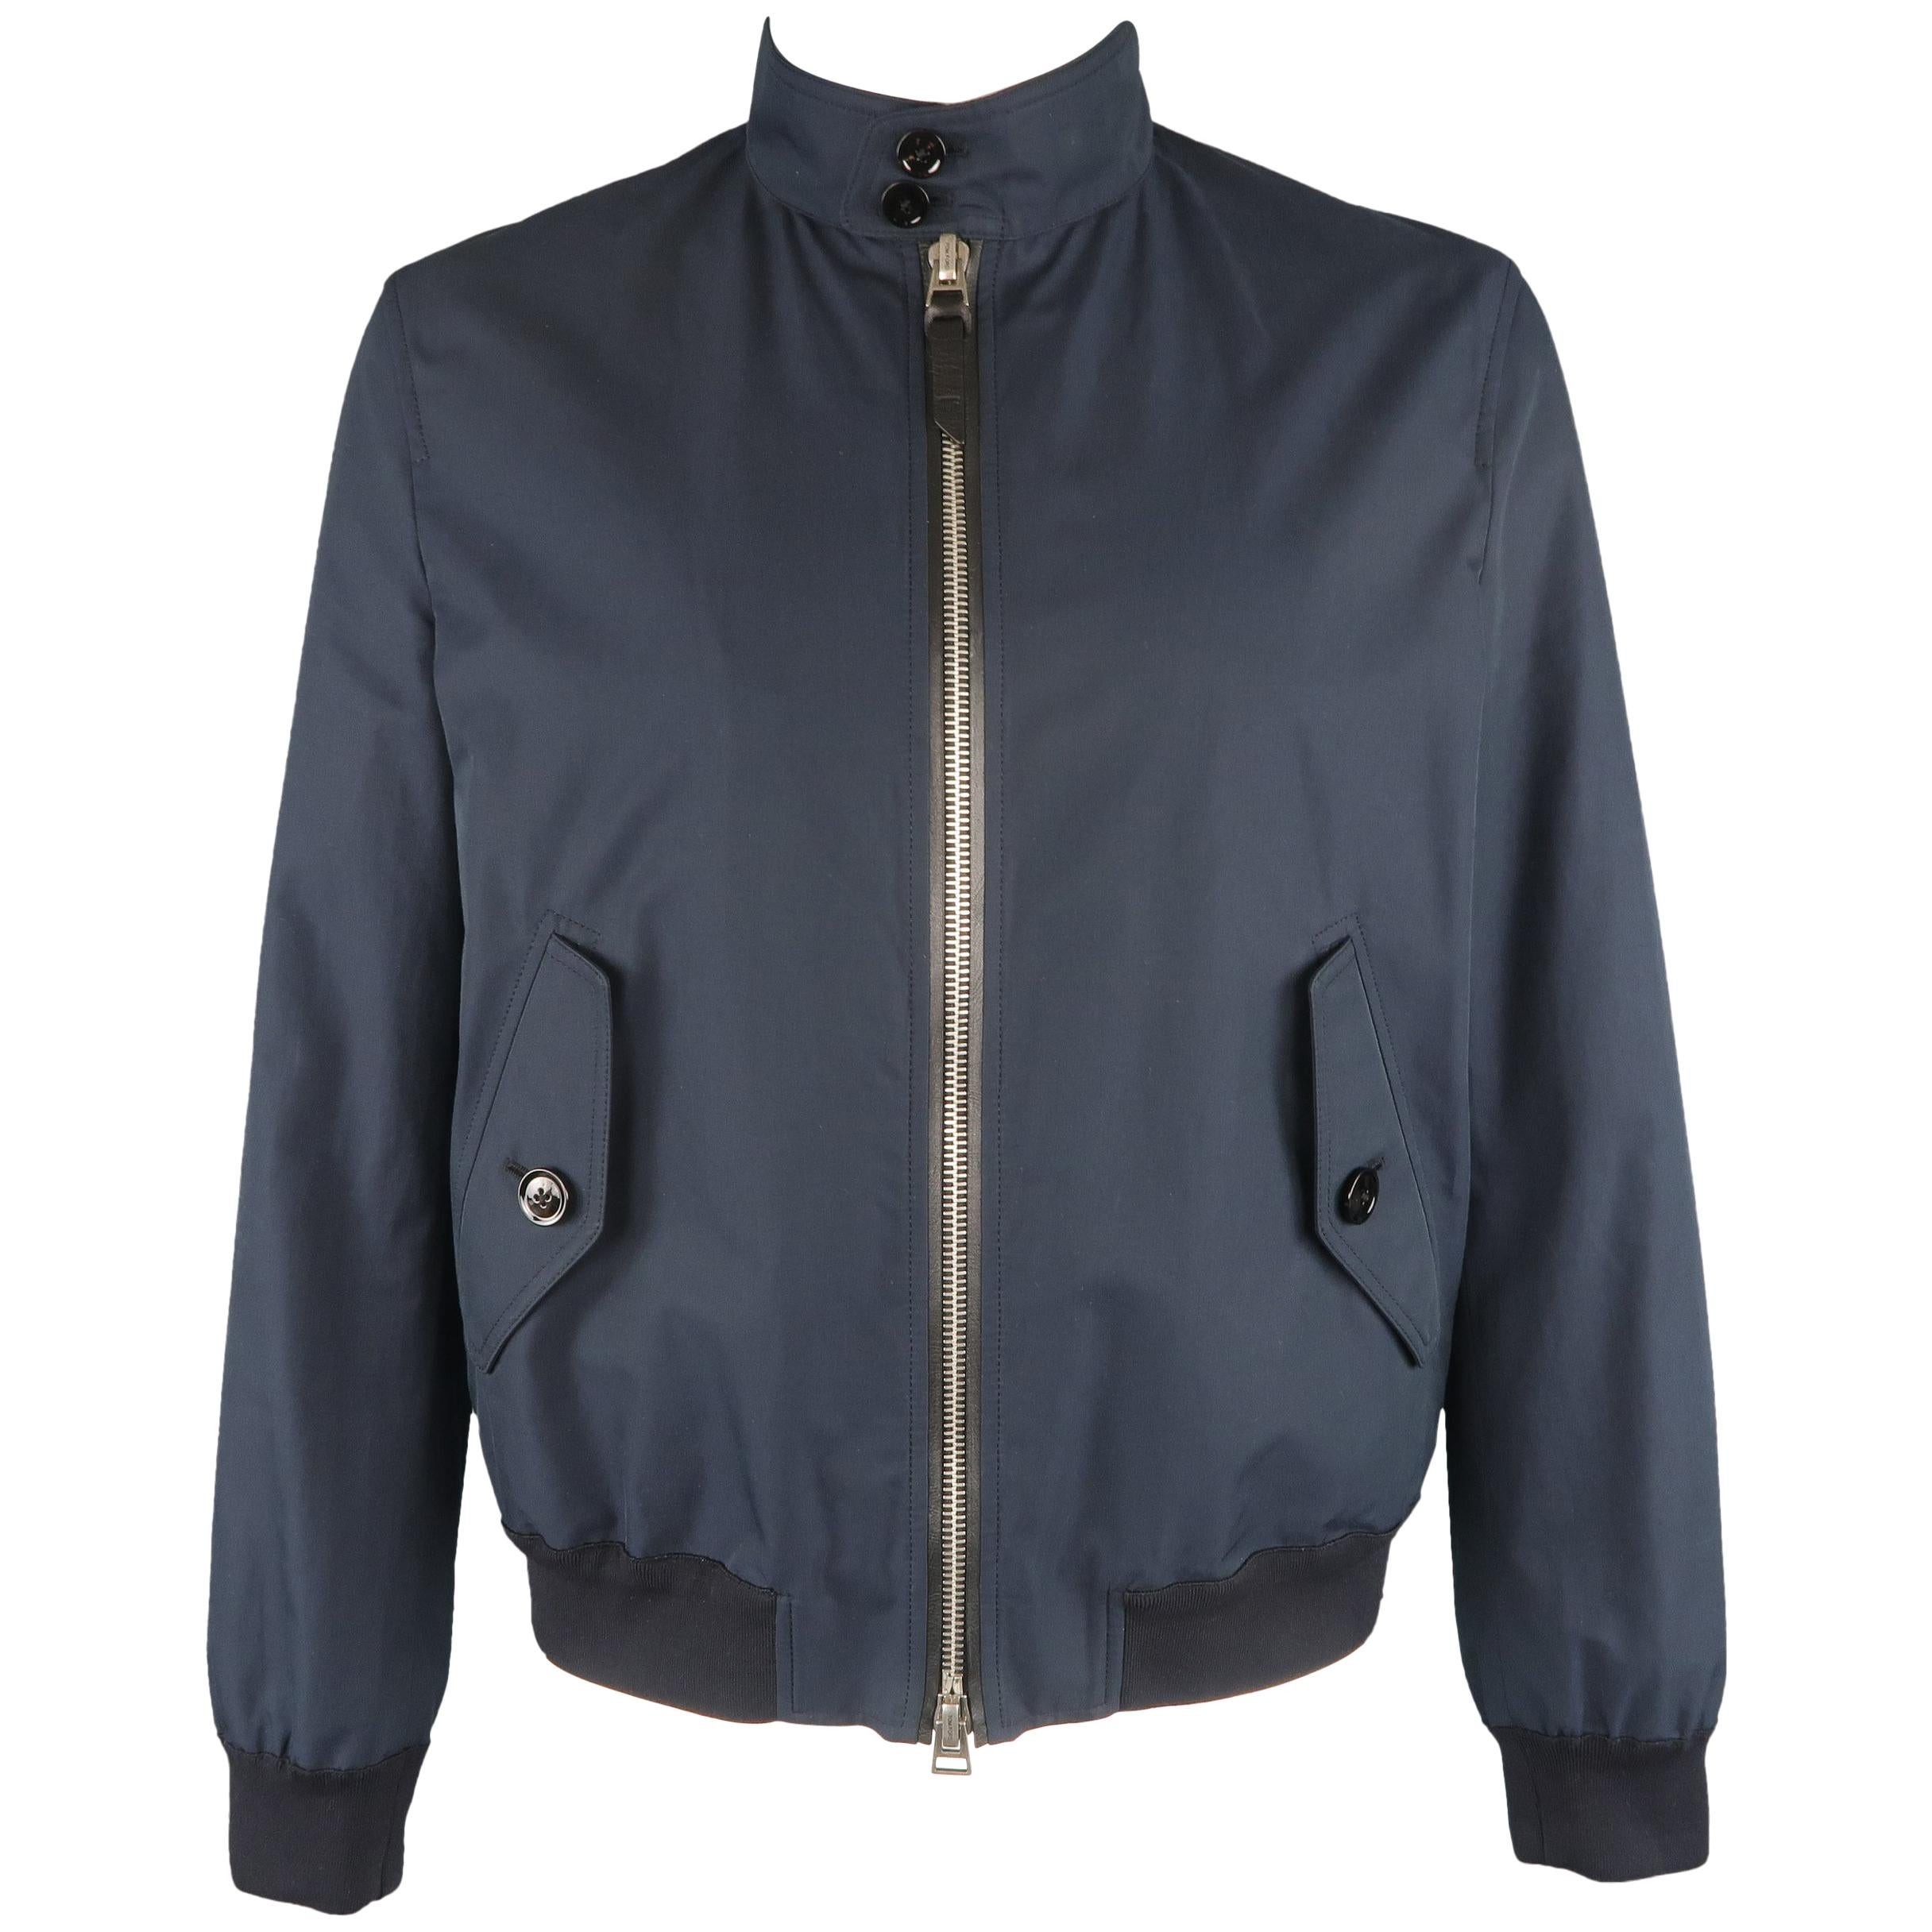 Tom Ford Jacket - Navy Cotton Stand Collar Bomber Jacket / Bomber